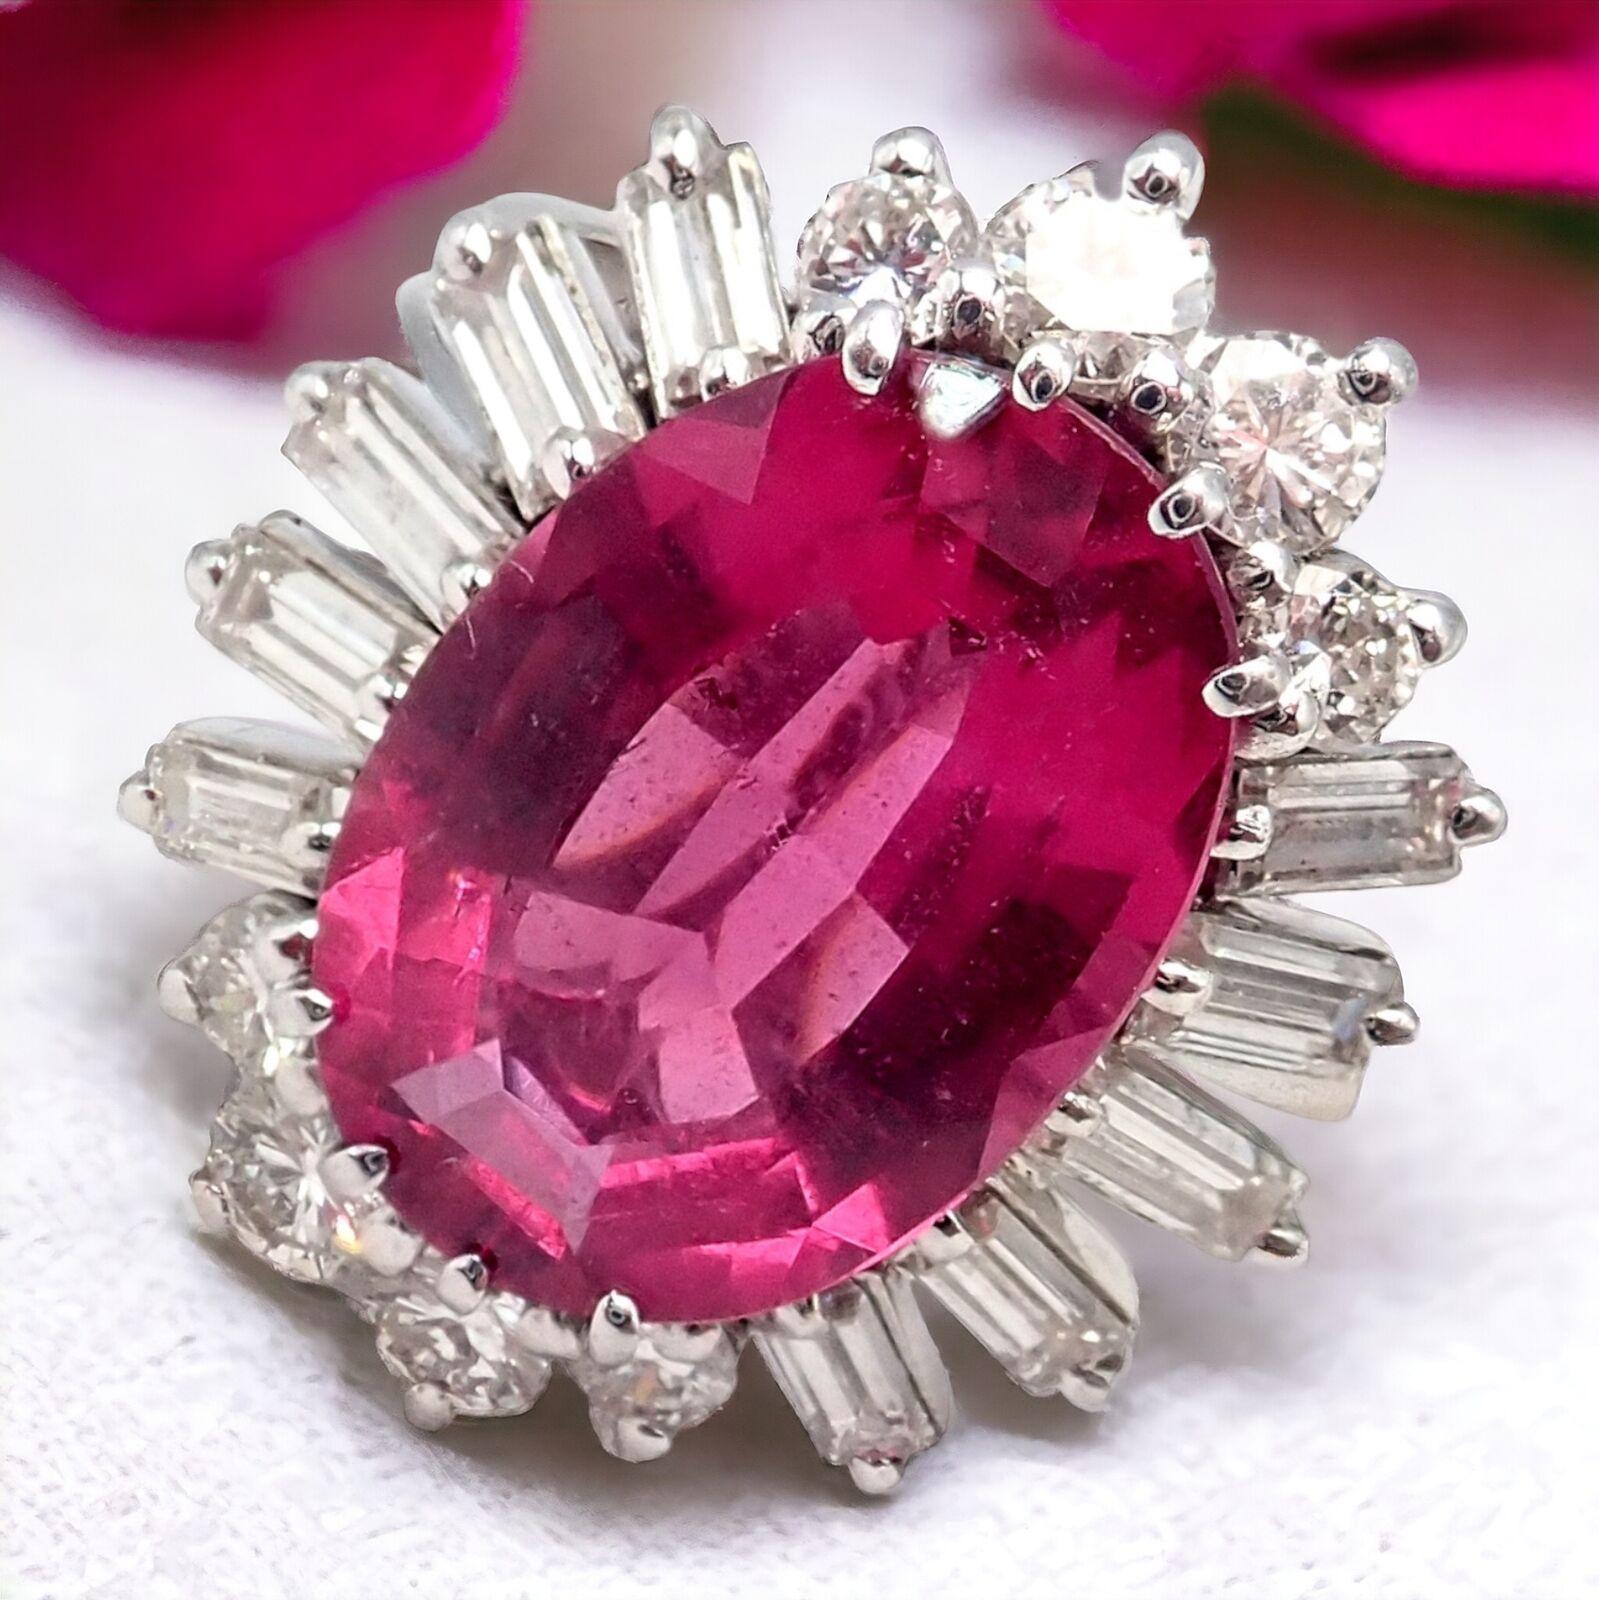 Brilliant Cut H. Stern Diamond Pink Tourmaline White Gold Ring And Earrings Set For Sale